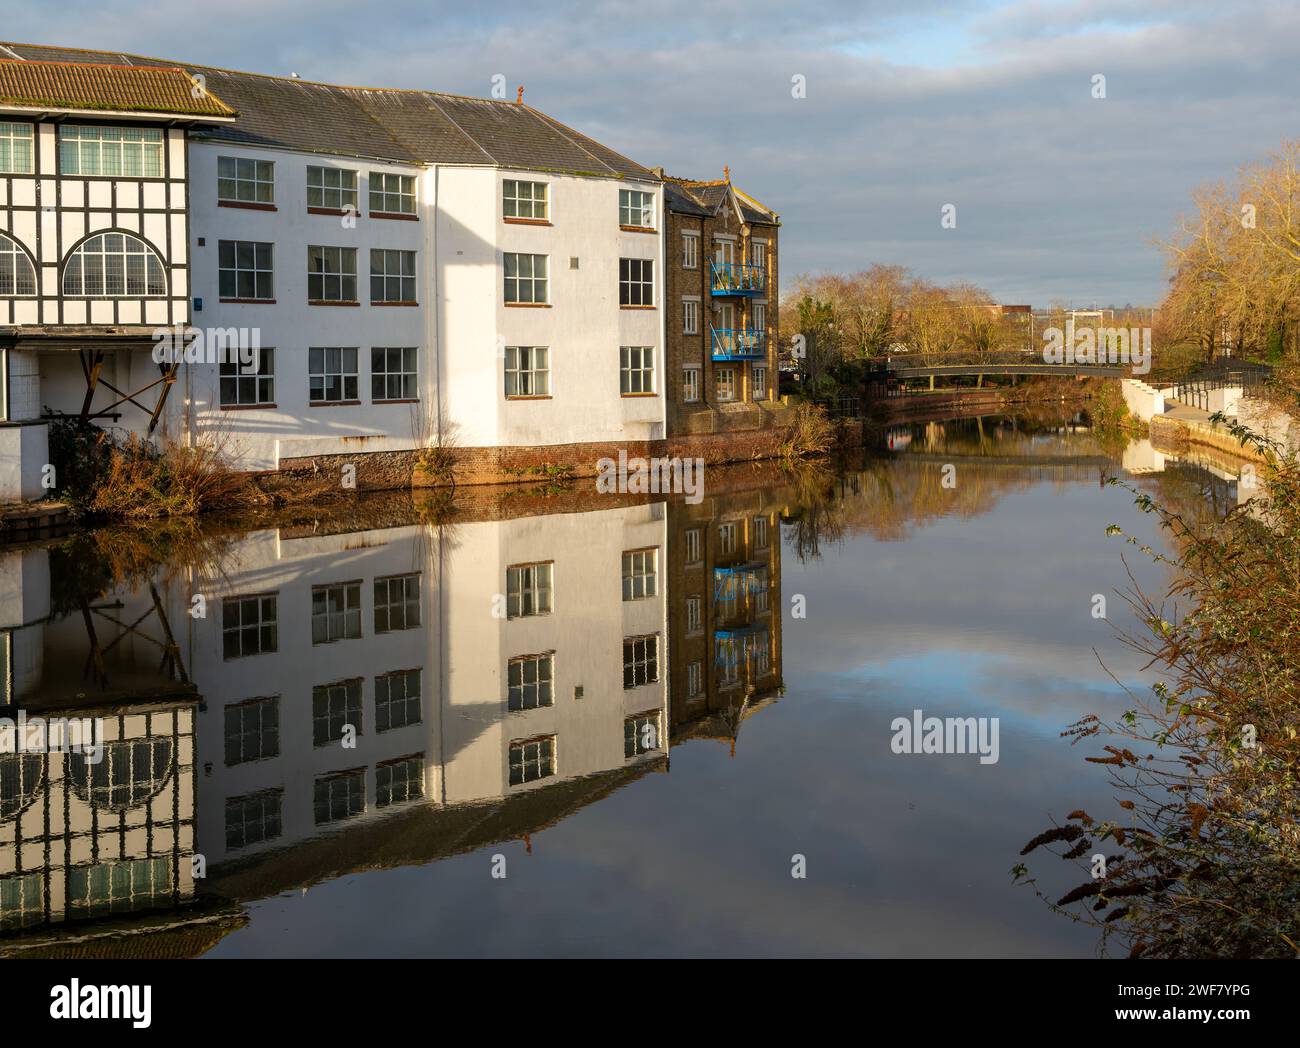 Reflection of buildings in water of River Tone, Dellers Wharf, Taunton, Somerset, England, UK Stock Photo